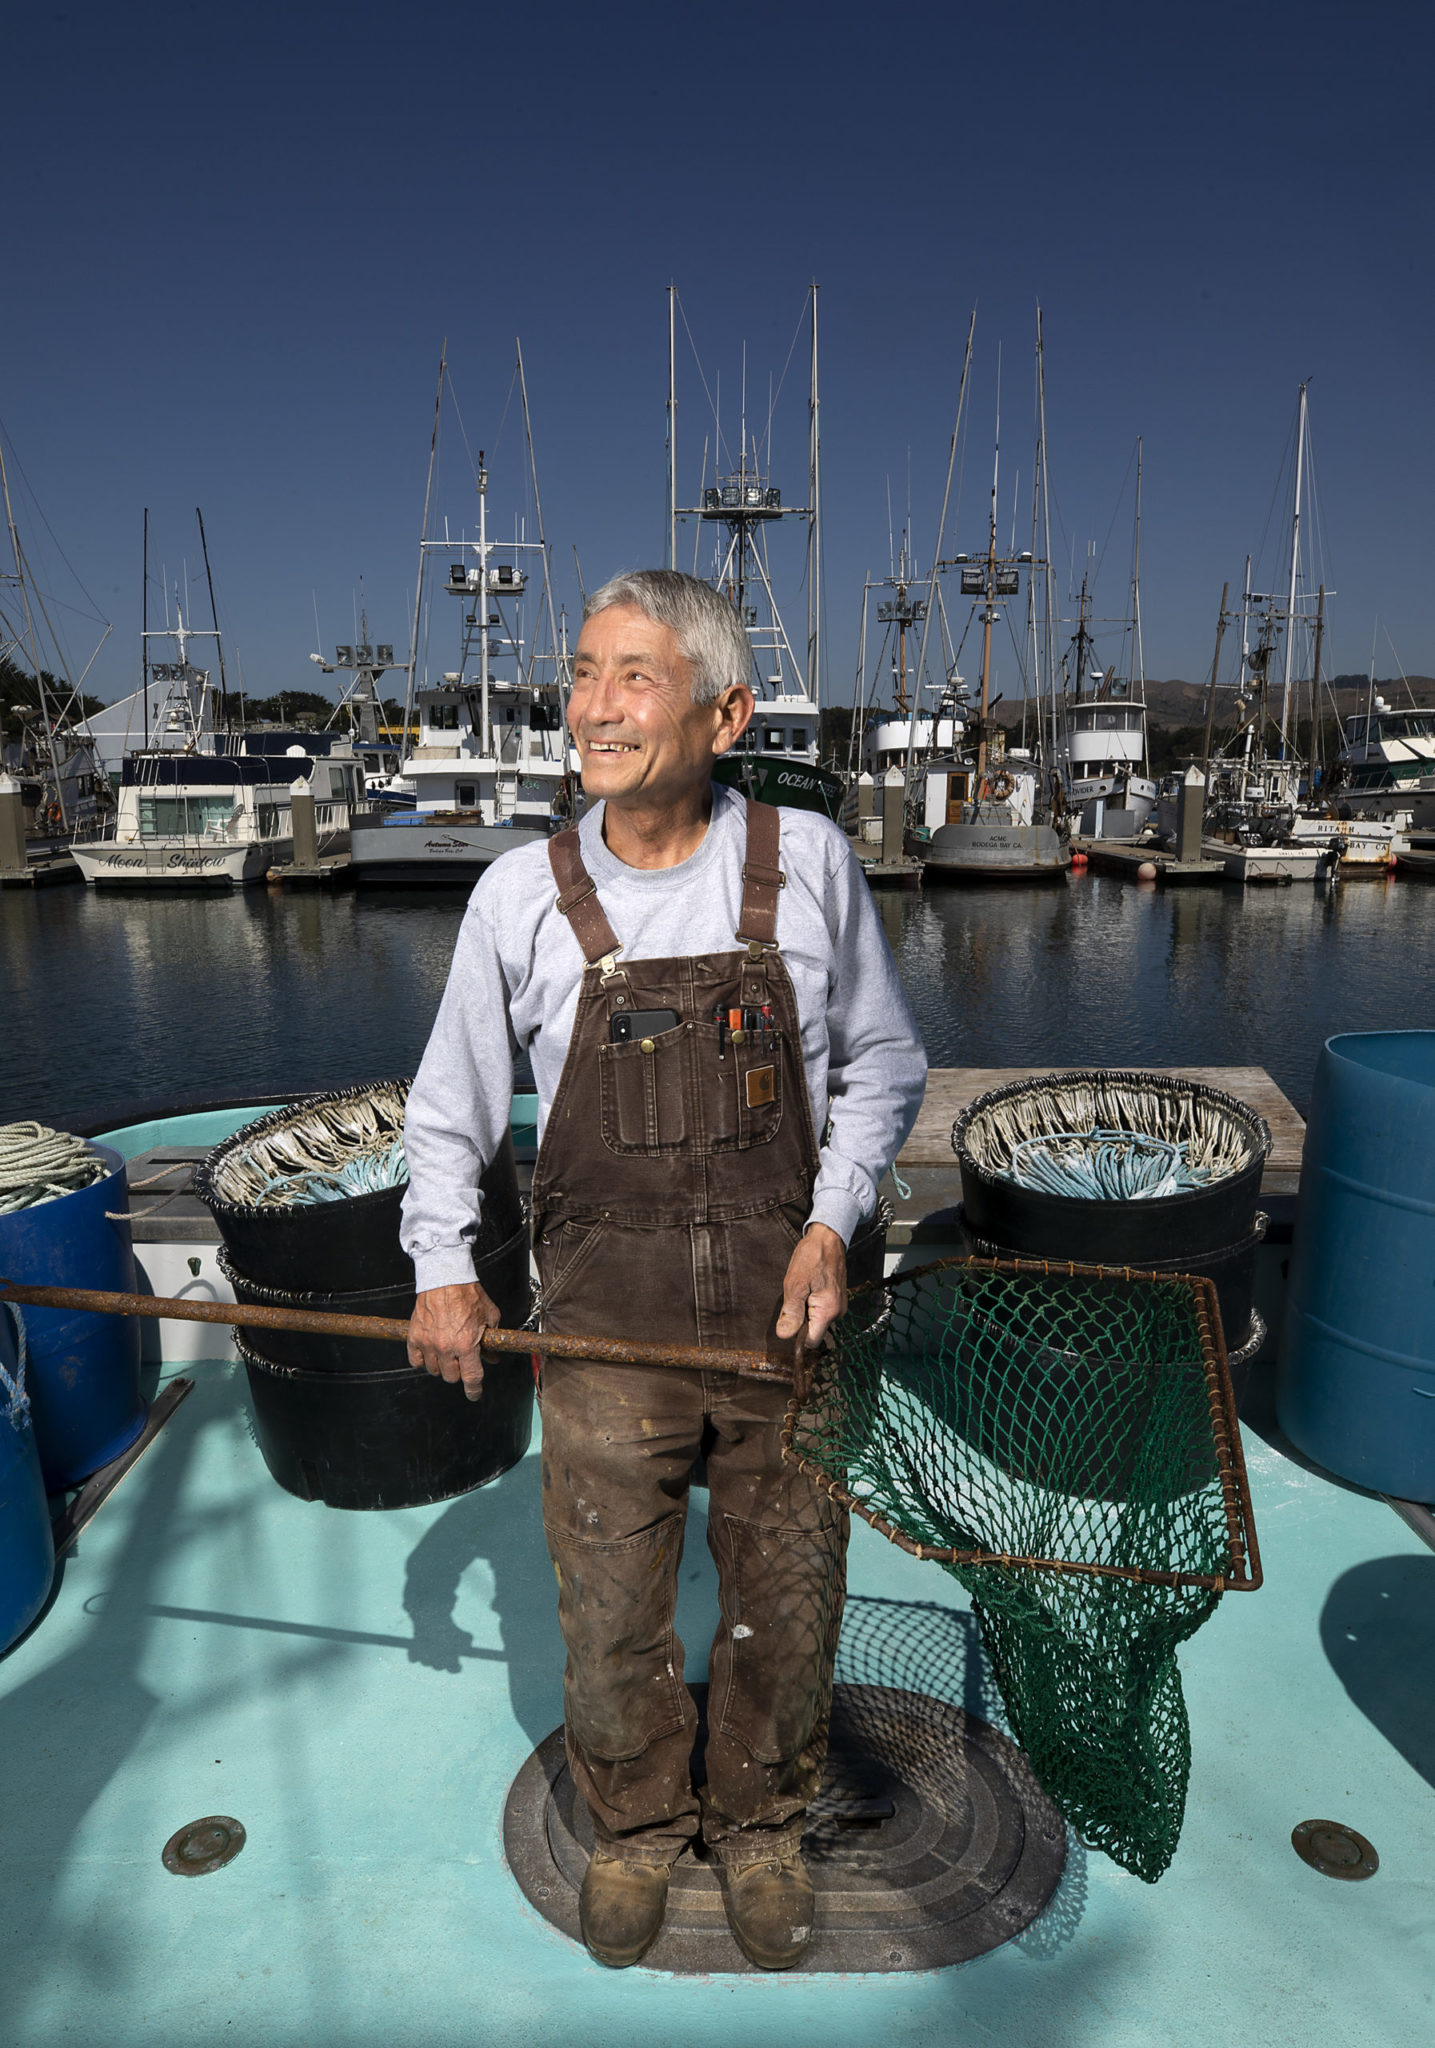 Dick Ogg captains the Karen Jeanne out of the Spud Point Marina in Bodega Bay. (John Burgess)